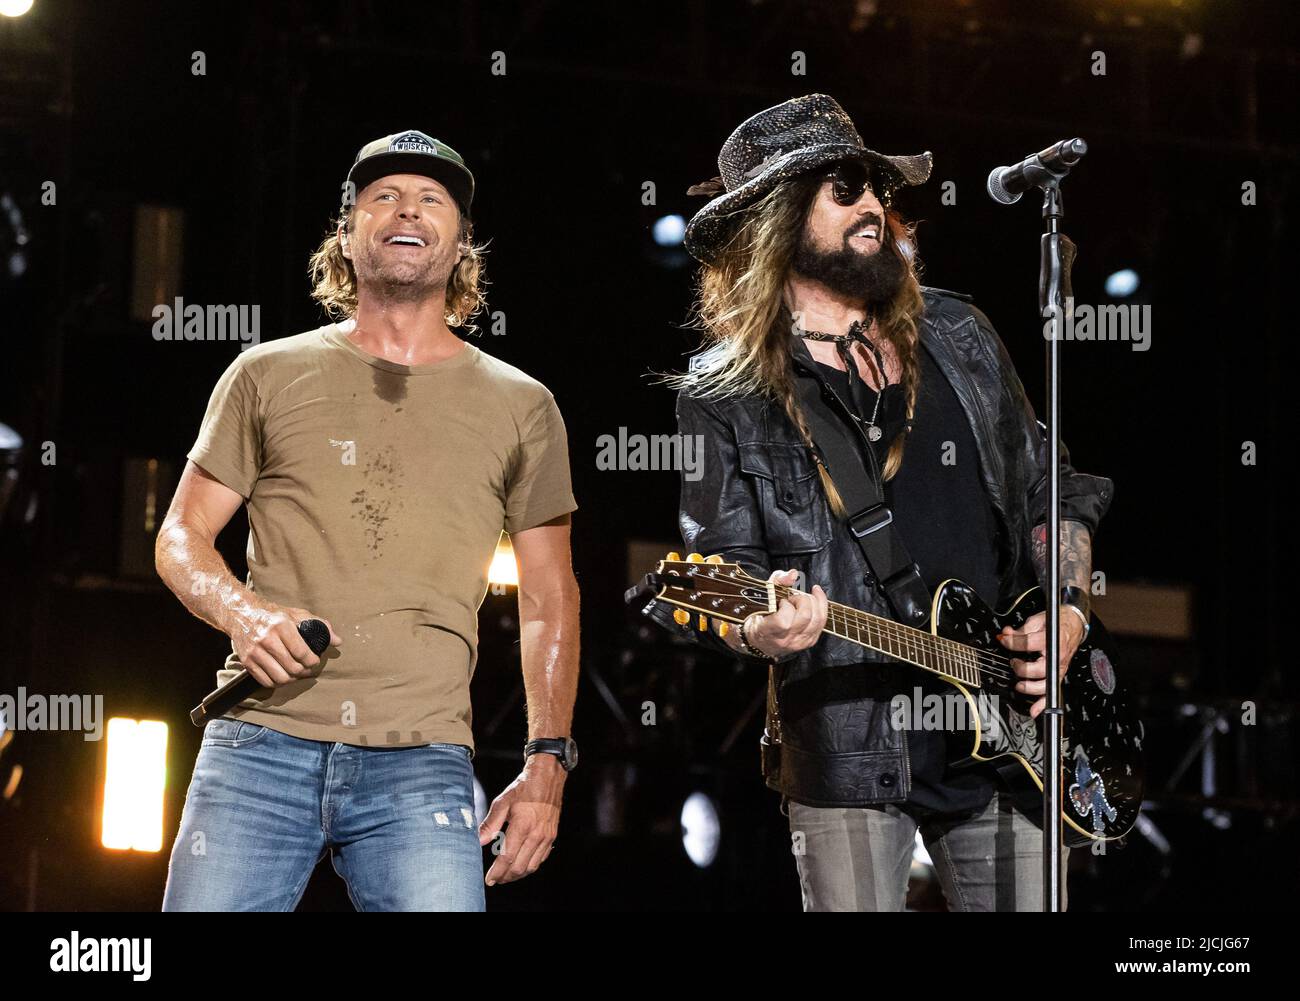 Nashville, USA. 12th June, 2022. Dierks Bentley and Billy Ray Cyrus perform during day 4 of the 2022 CMA FEST at Nissan Stadium on June 12, 2022 in Nashville, Tennessee. Photo: Amiee Stubbs/ImageSPACE/Sipa USA Credit: Sipa USA/Alamy Live News Stock Photo